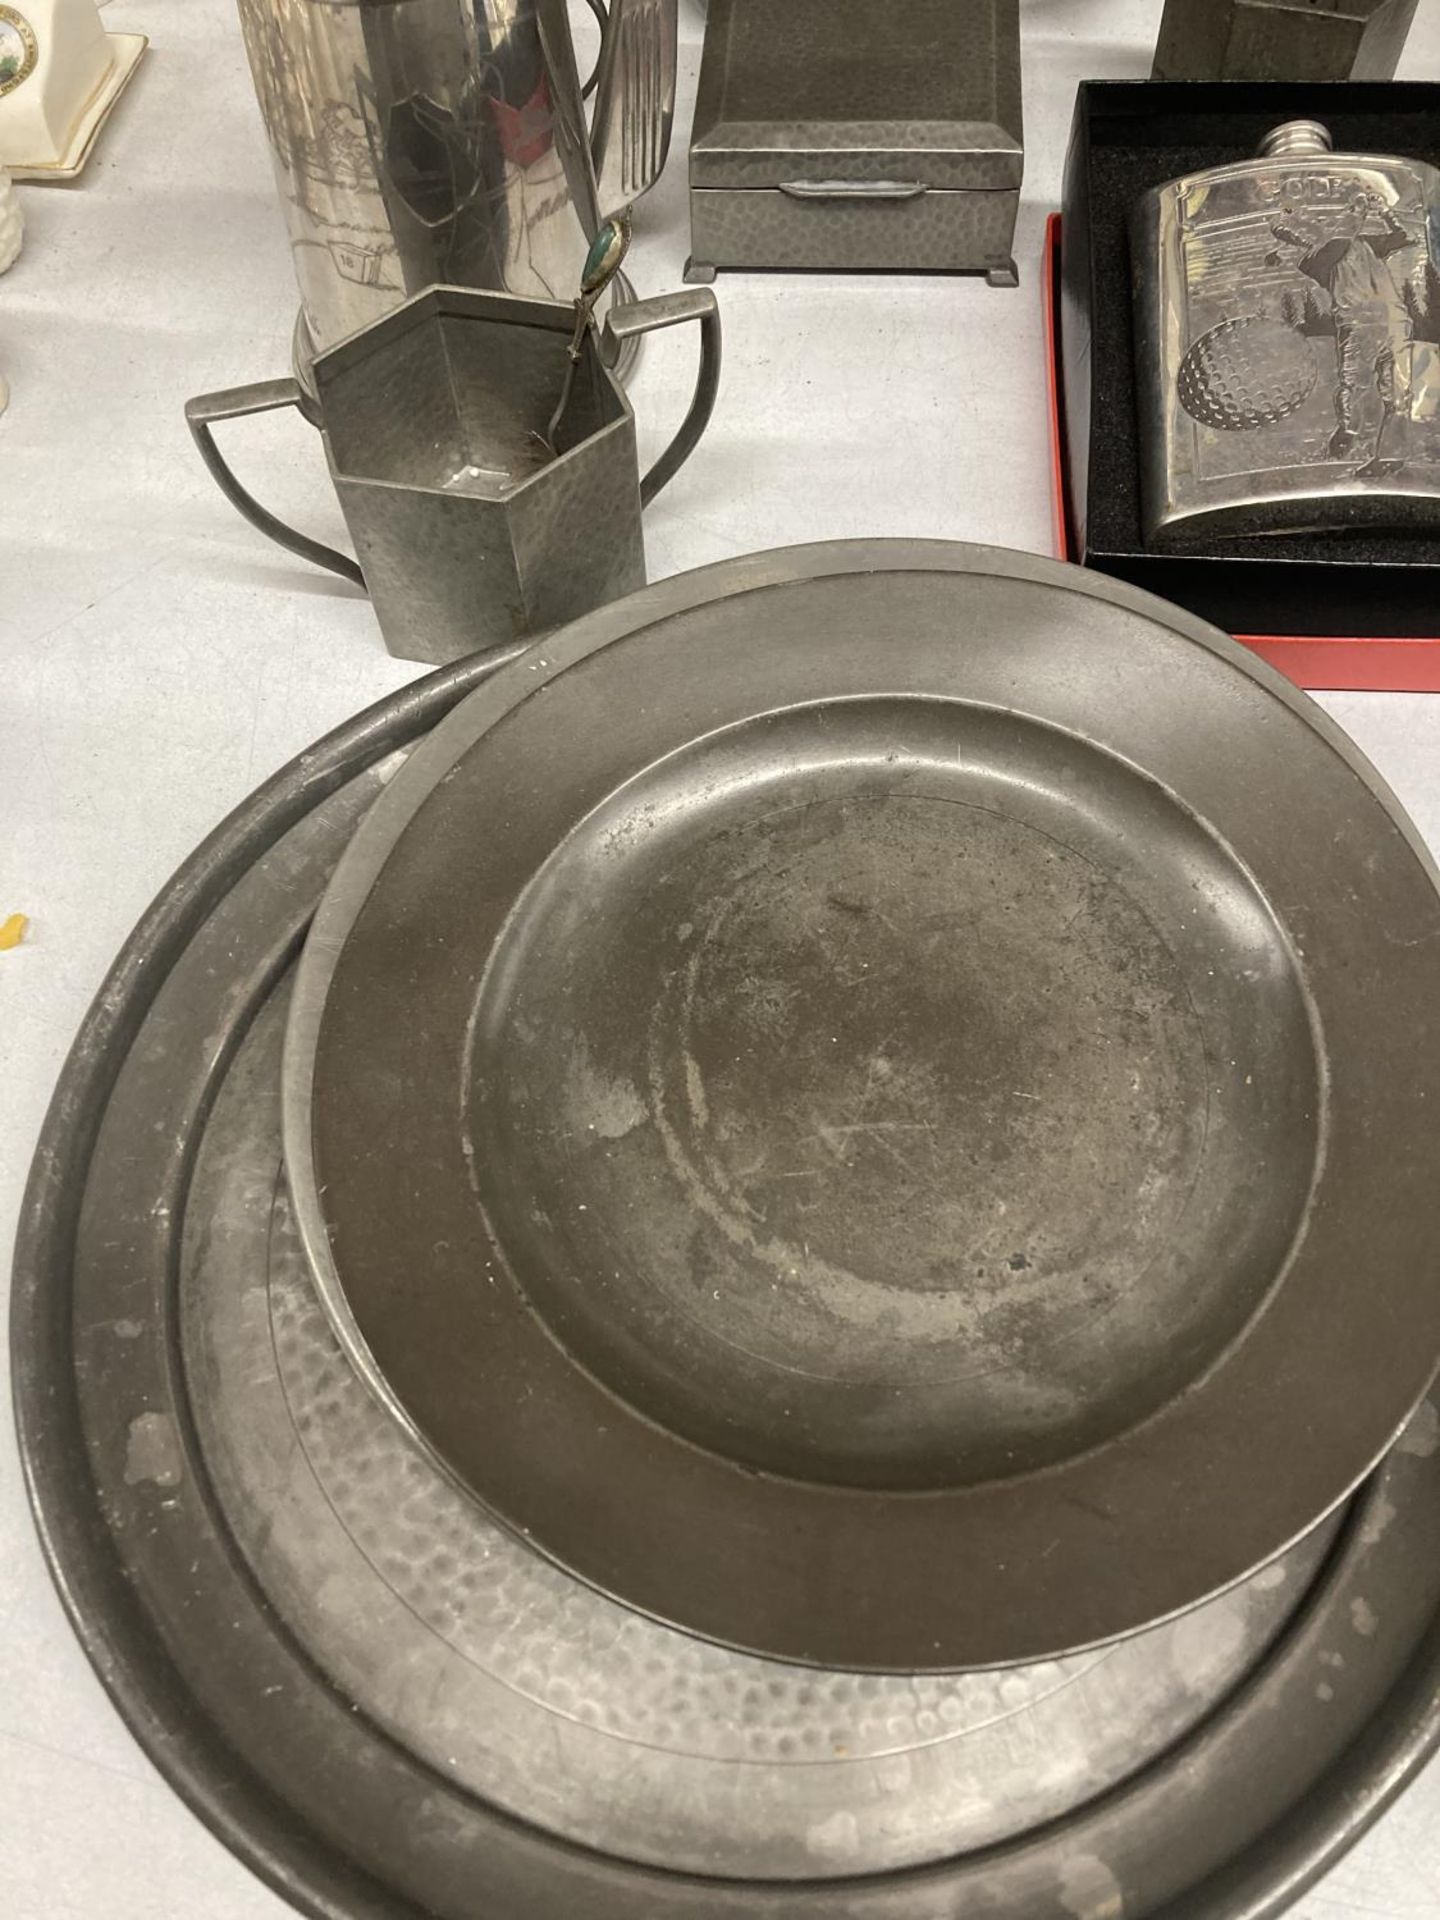 A LARGE QUANTITY OF PEWTER ITEMS TO INCLUDE PLATES, HIP FLASK, TANKARDS, BOXES, JUGS ETC - Image 4 of 7